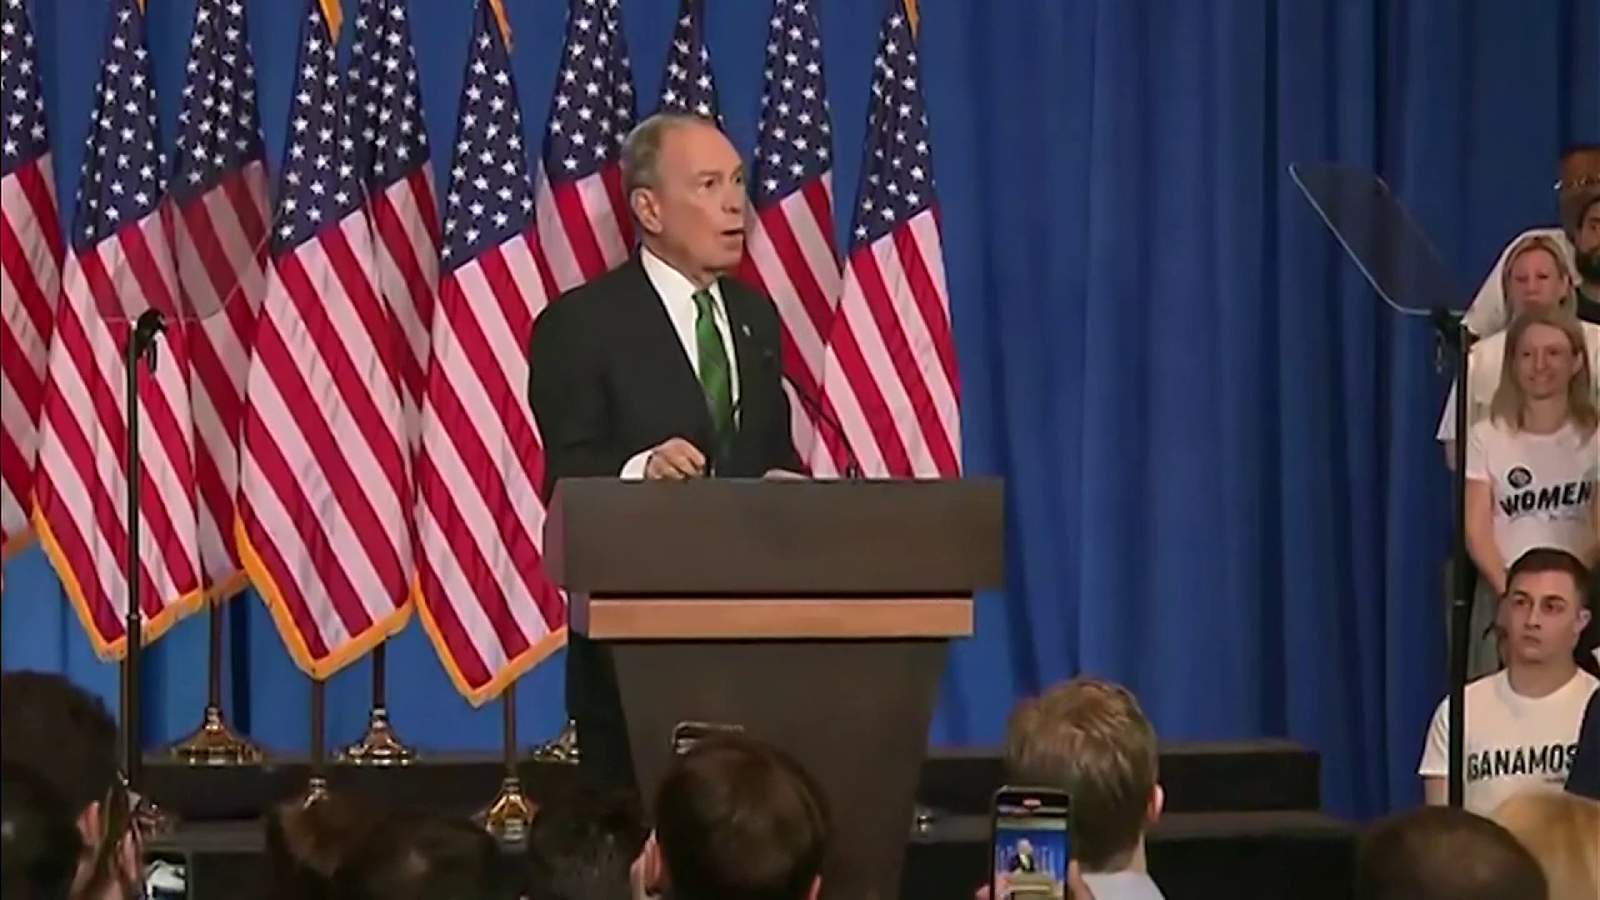 Republicans cry foul over Bloomberg donations for felon voters